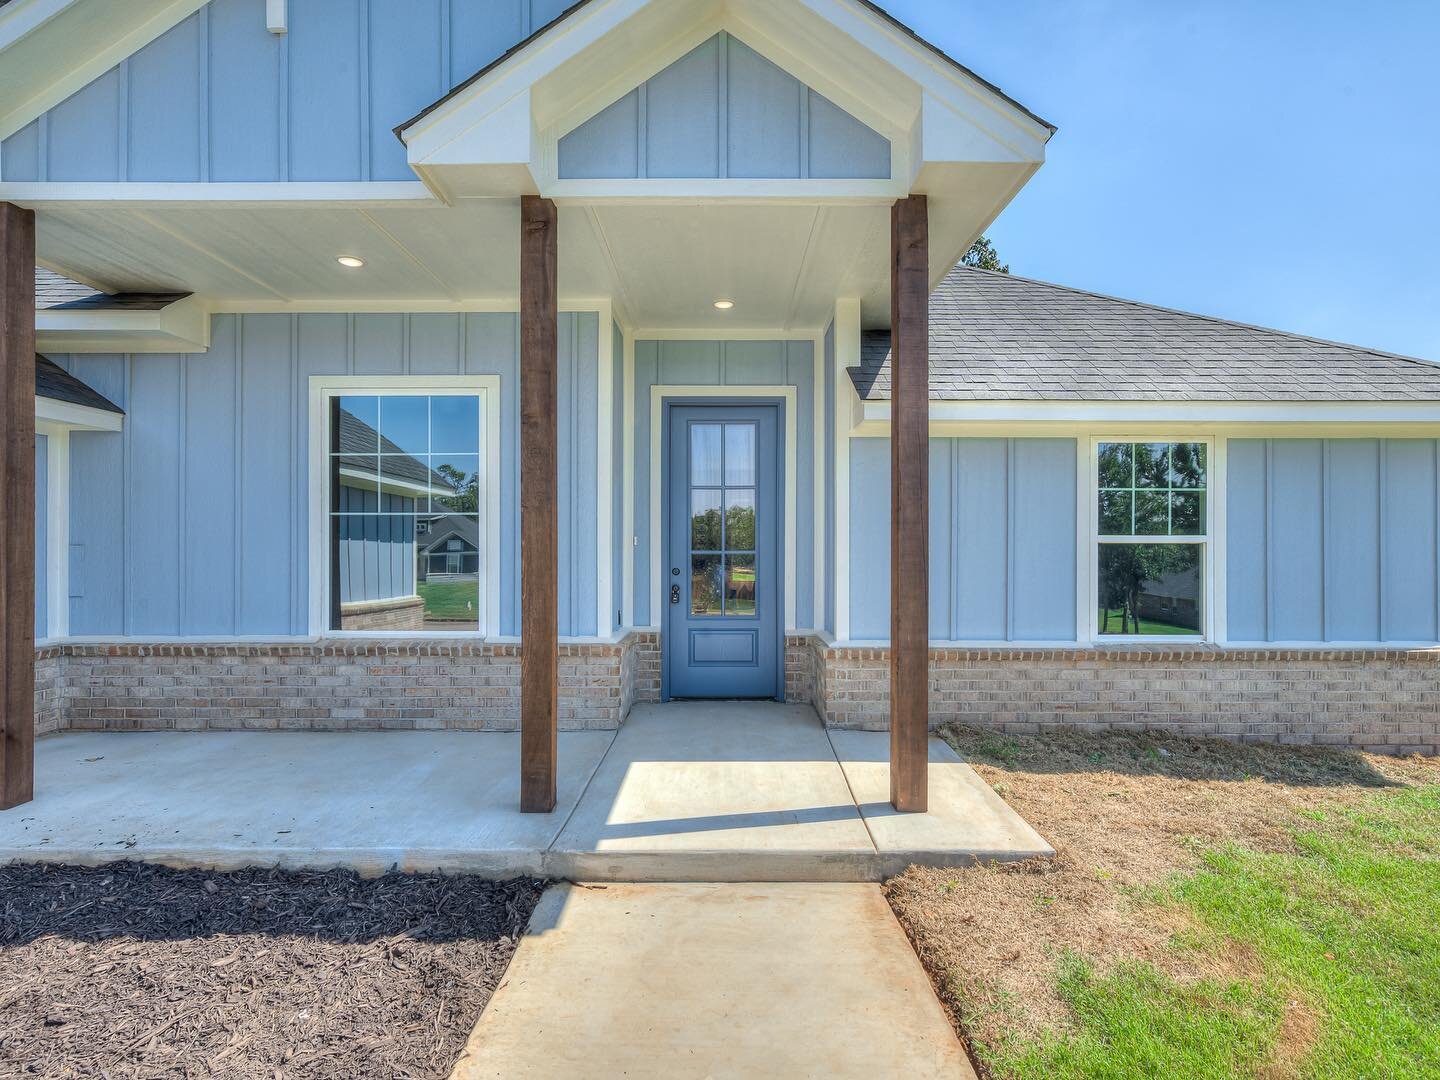 Gorgeous new designer home is available now!

3 bedroom / 2 bathroom / 3 car garage + Study on 1 acre lot

9500 Megans Way
McLoud, OK

Contact Berry Sheffield for more information or to schedule a showing (405)550-4349